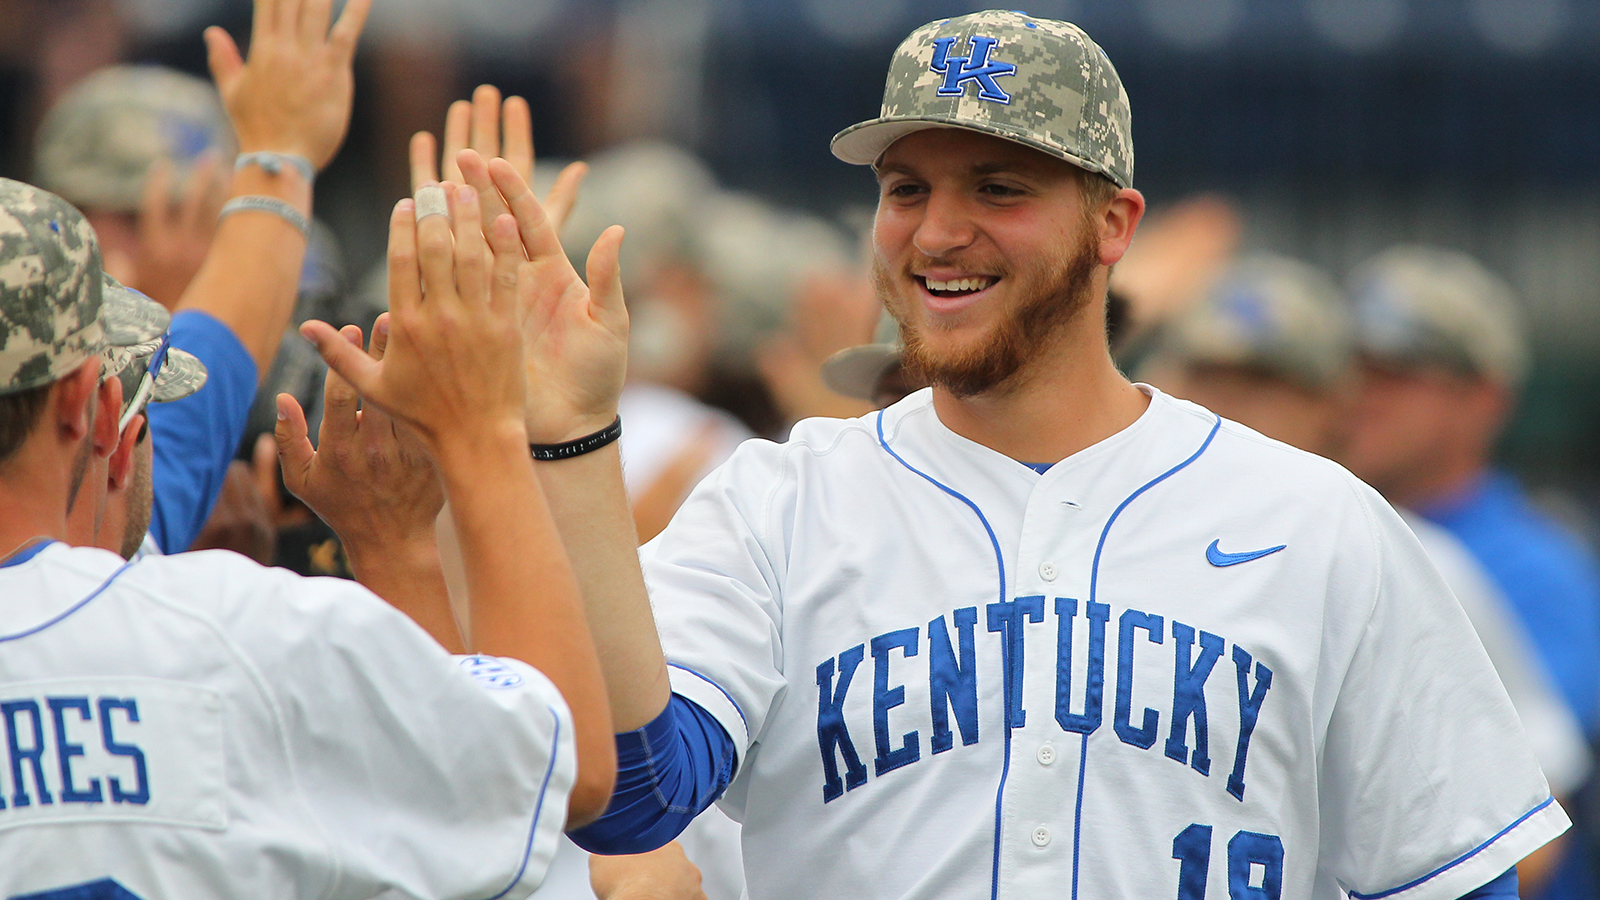 This Day in UK Athletics History: AJ Reed Named National Player of the Year (2014)